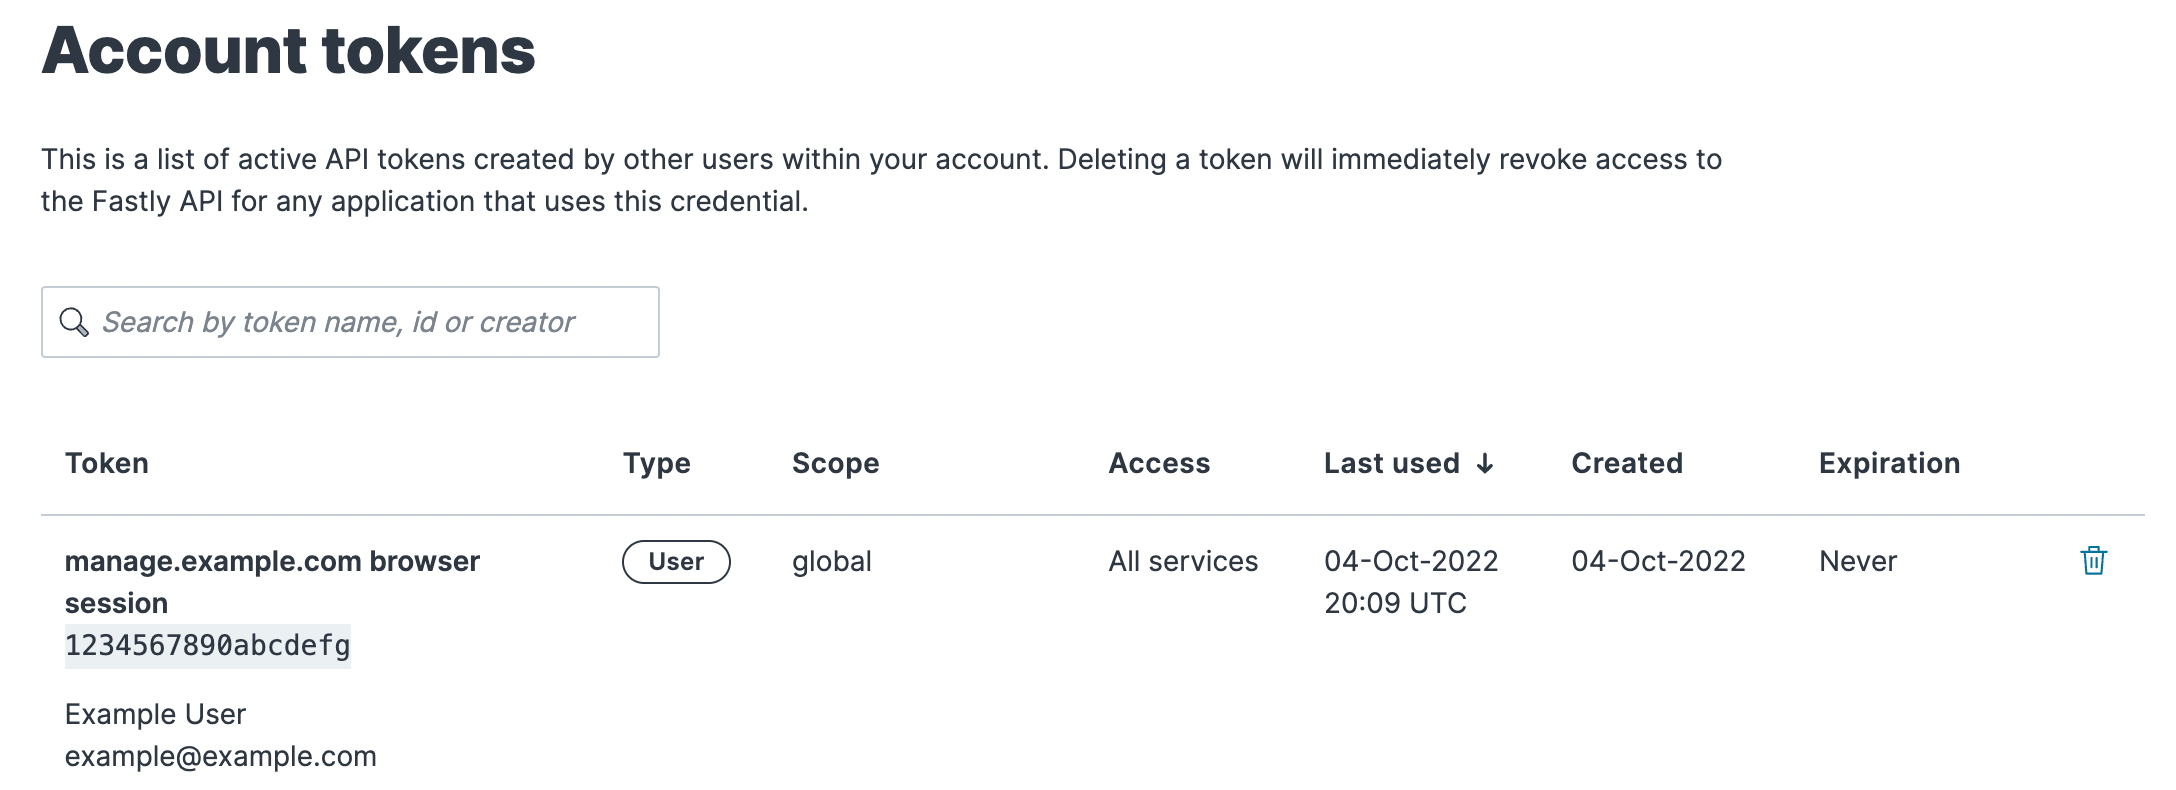 account token management page